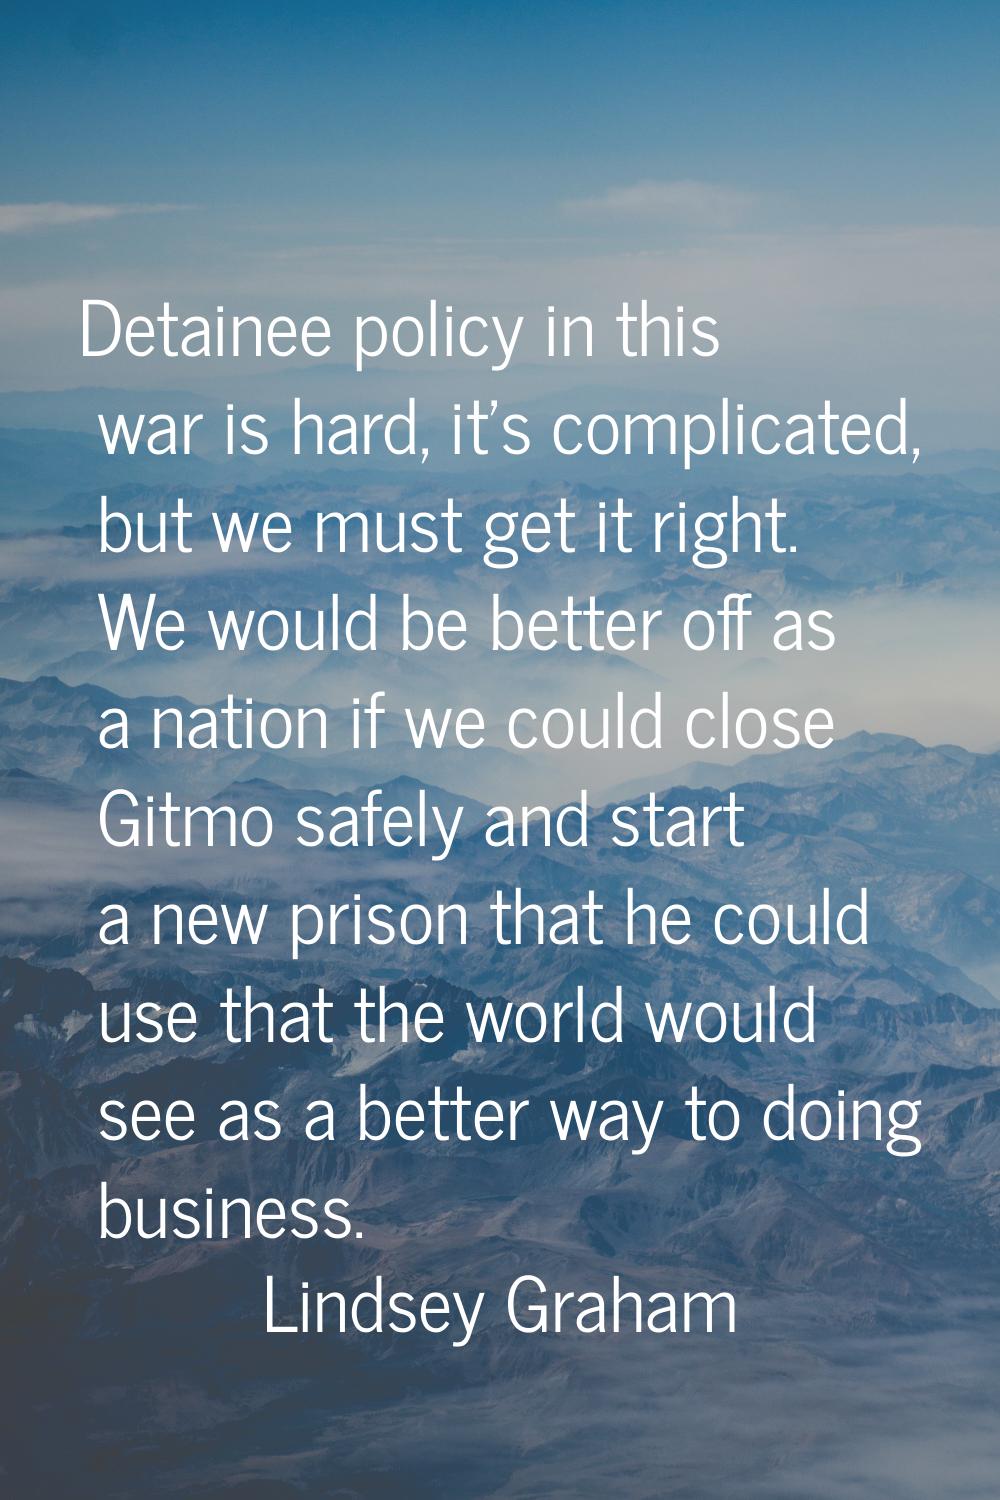 Detainee policy in this war is hard, it's complicated, but we must get it right. We would be better